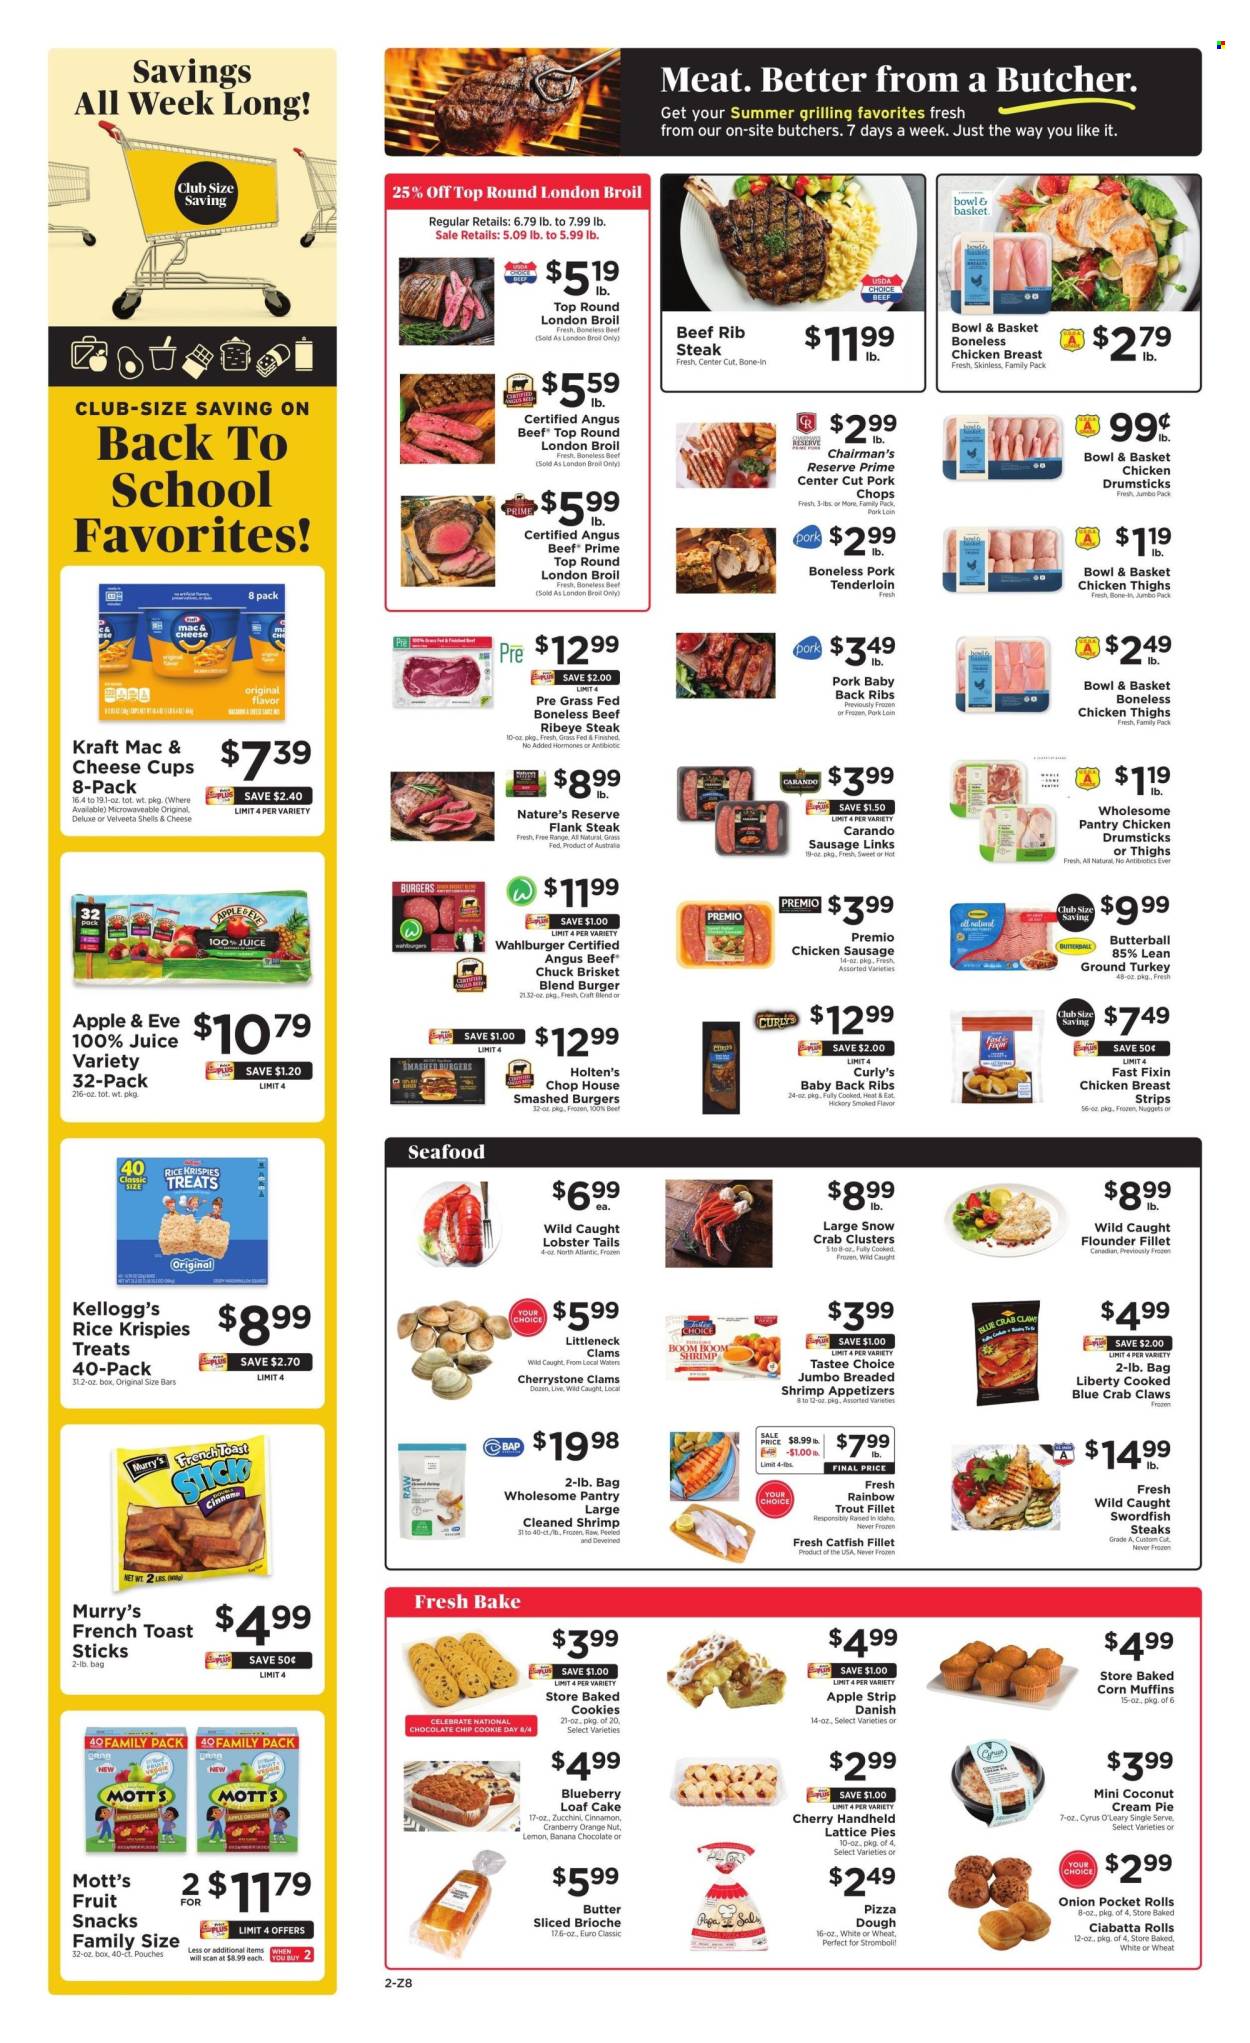 thumbnail - ShopRite Flyer - 08/02/2024 - 08/08/2024 - Sales products - chicken thighs, chicken, dinner rolls, pie, cream pie, muffin, corn muffin, danish pastry, cookies, pizza dough, fish fillets, trout, cake, loaf cake, ready meal, french toast, brioche, chicken strips, strips, Rice Krispies, swordfish, fish steak, steak, snack, fruit snack, seafood, shrimps, clams, crab, breaded shrimps, crab clusters, flounder, lobster, lobster tail, beef meat, beef steak, pork chops, pork meat, chicken breasts, flank steak, sausage, chicken sausage, pork tenderloin, boneless chicken thighs, juice, ribs, pork ribs, pork back ribs, mac and cheese, chicken drumsticks, ribeye steak, hamburger, burger patties, brisket, ground turkey, turkey. Page 2.